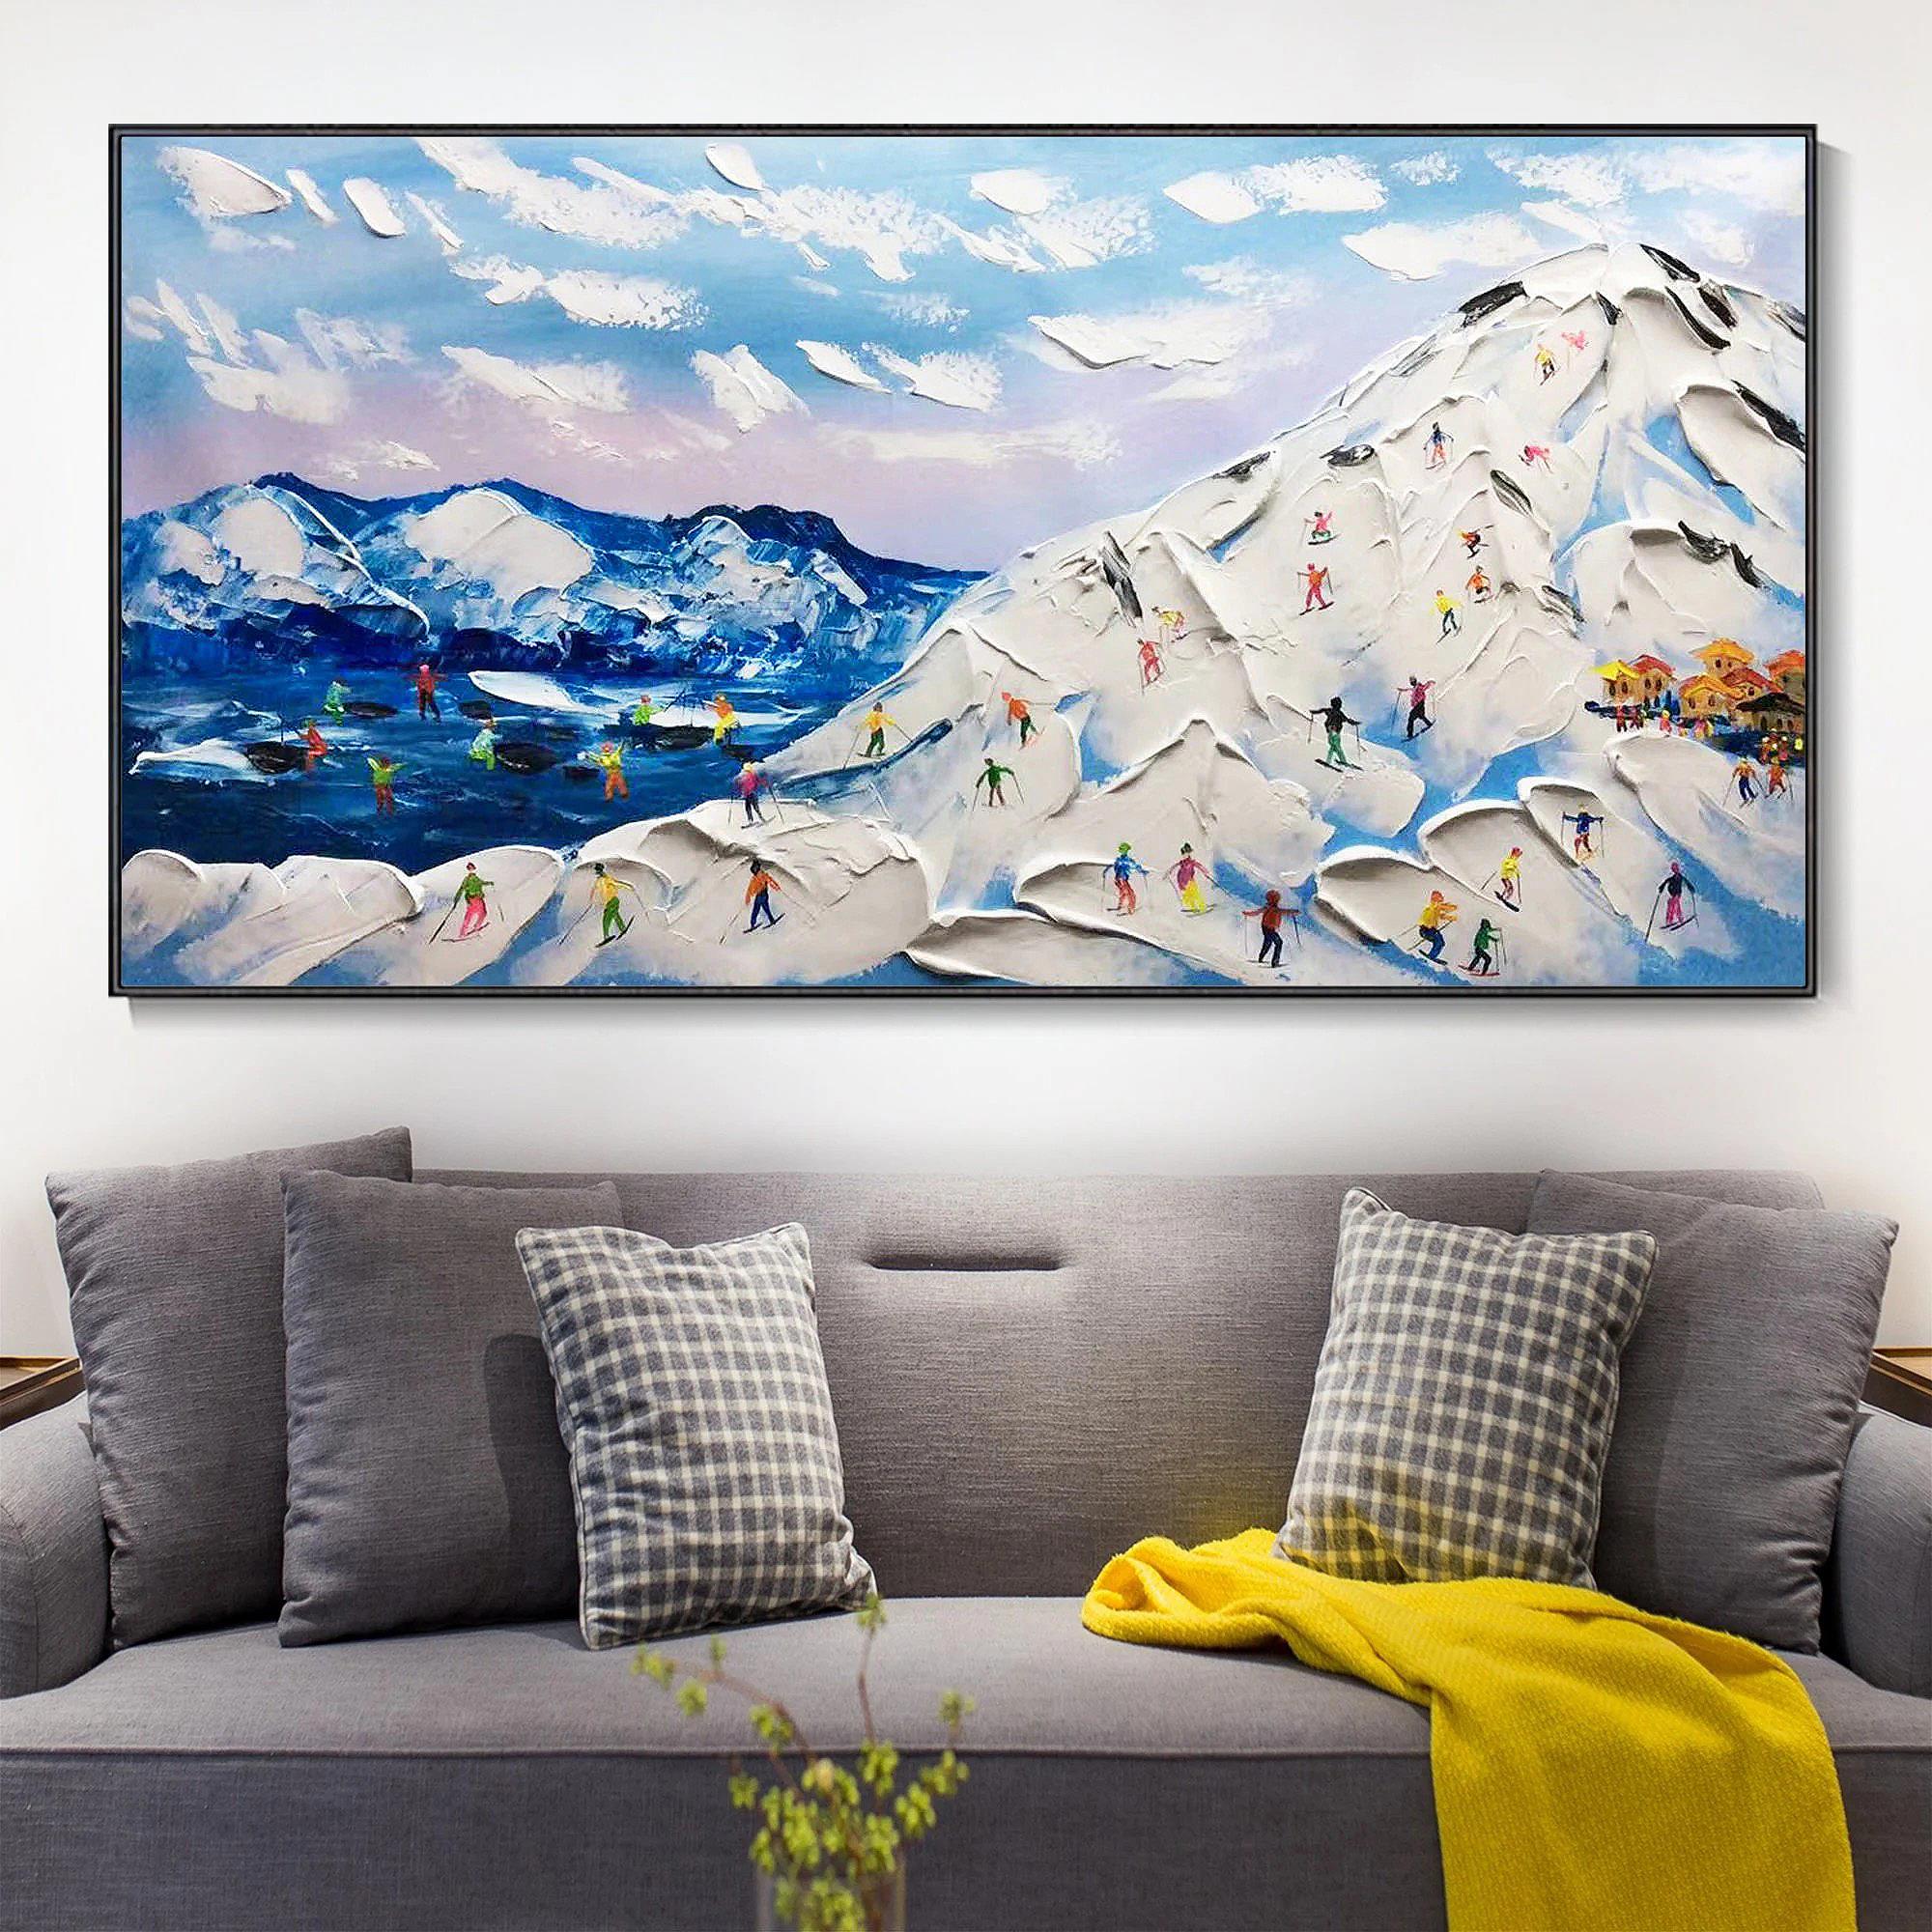 Skier on Snowy Mountain Wall Art Sport White Snow Skiing Room Decor by Knife 14 Oil Paintings